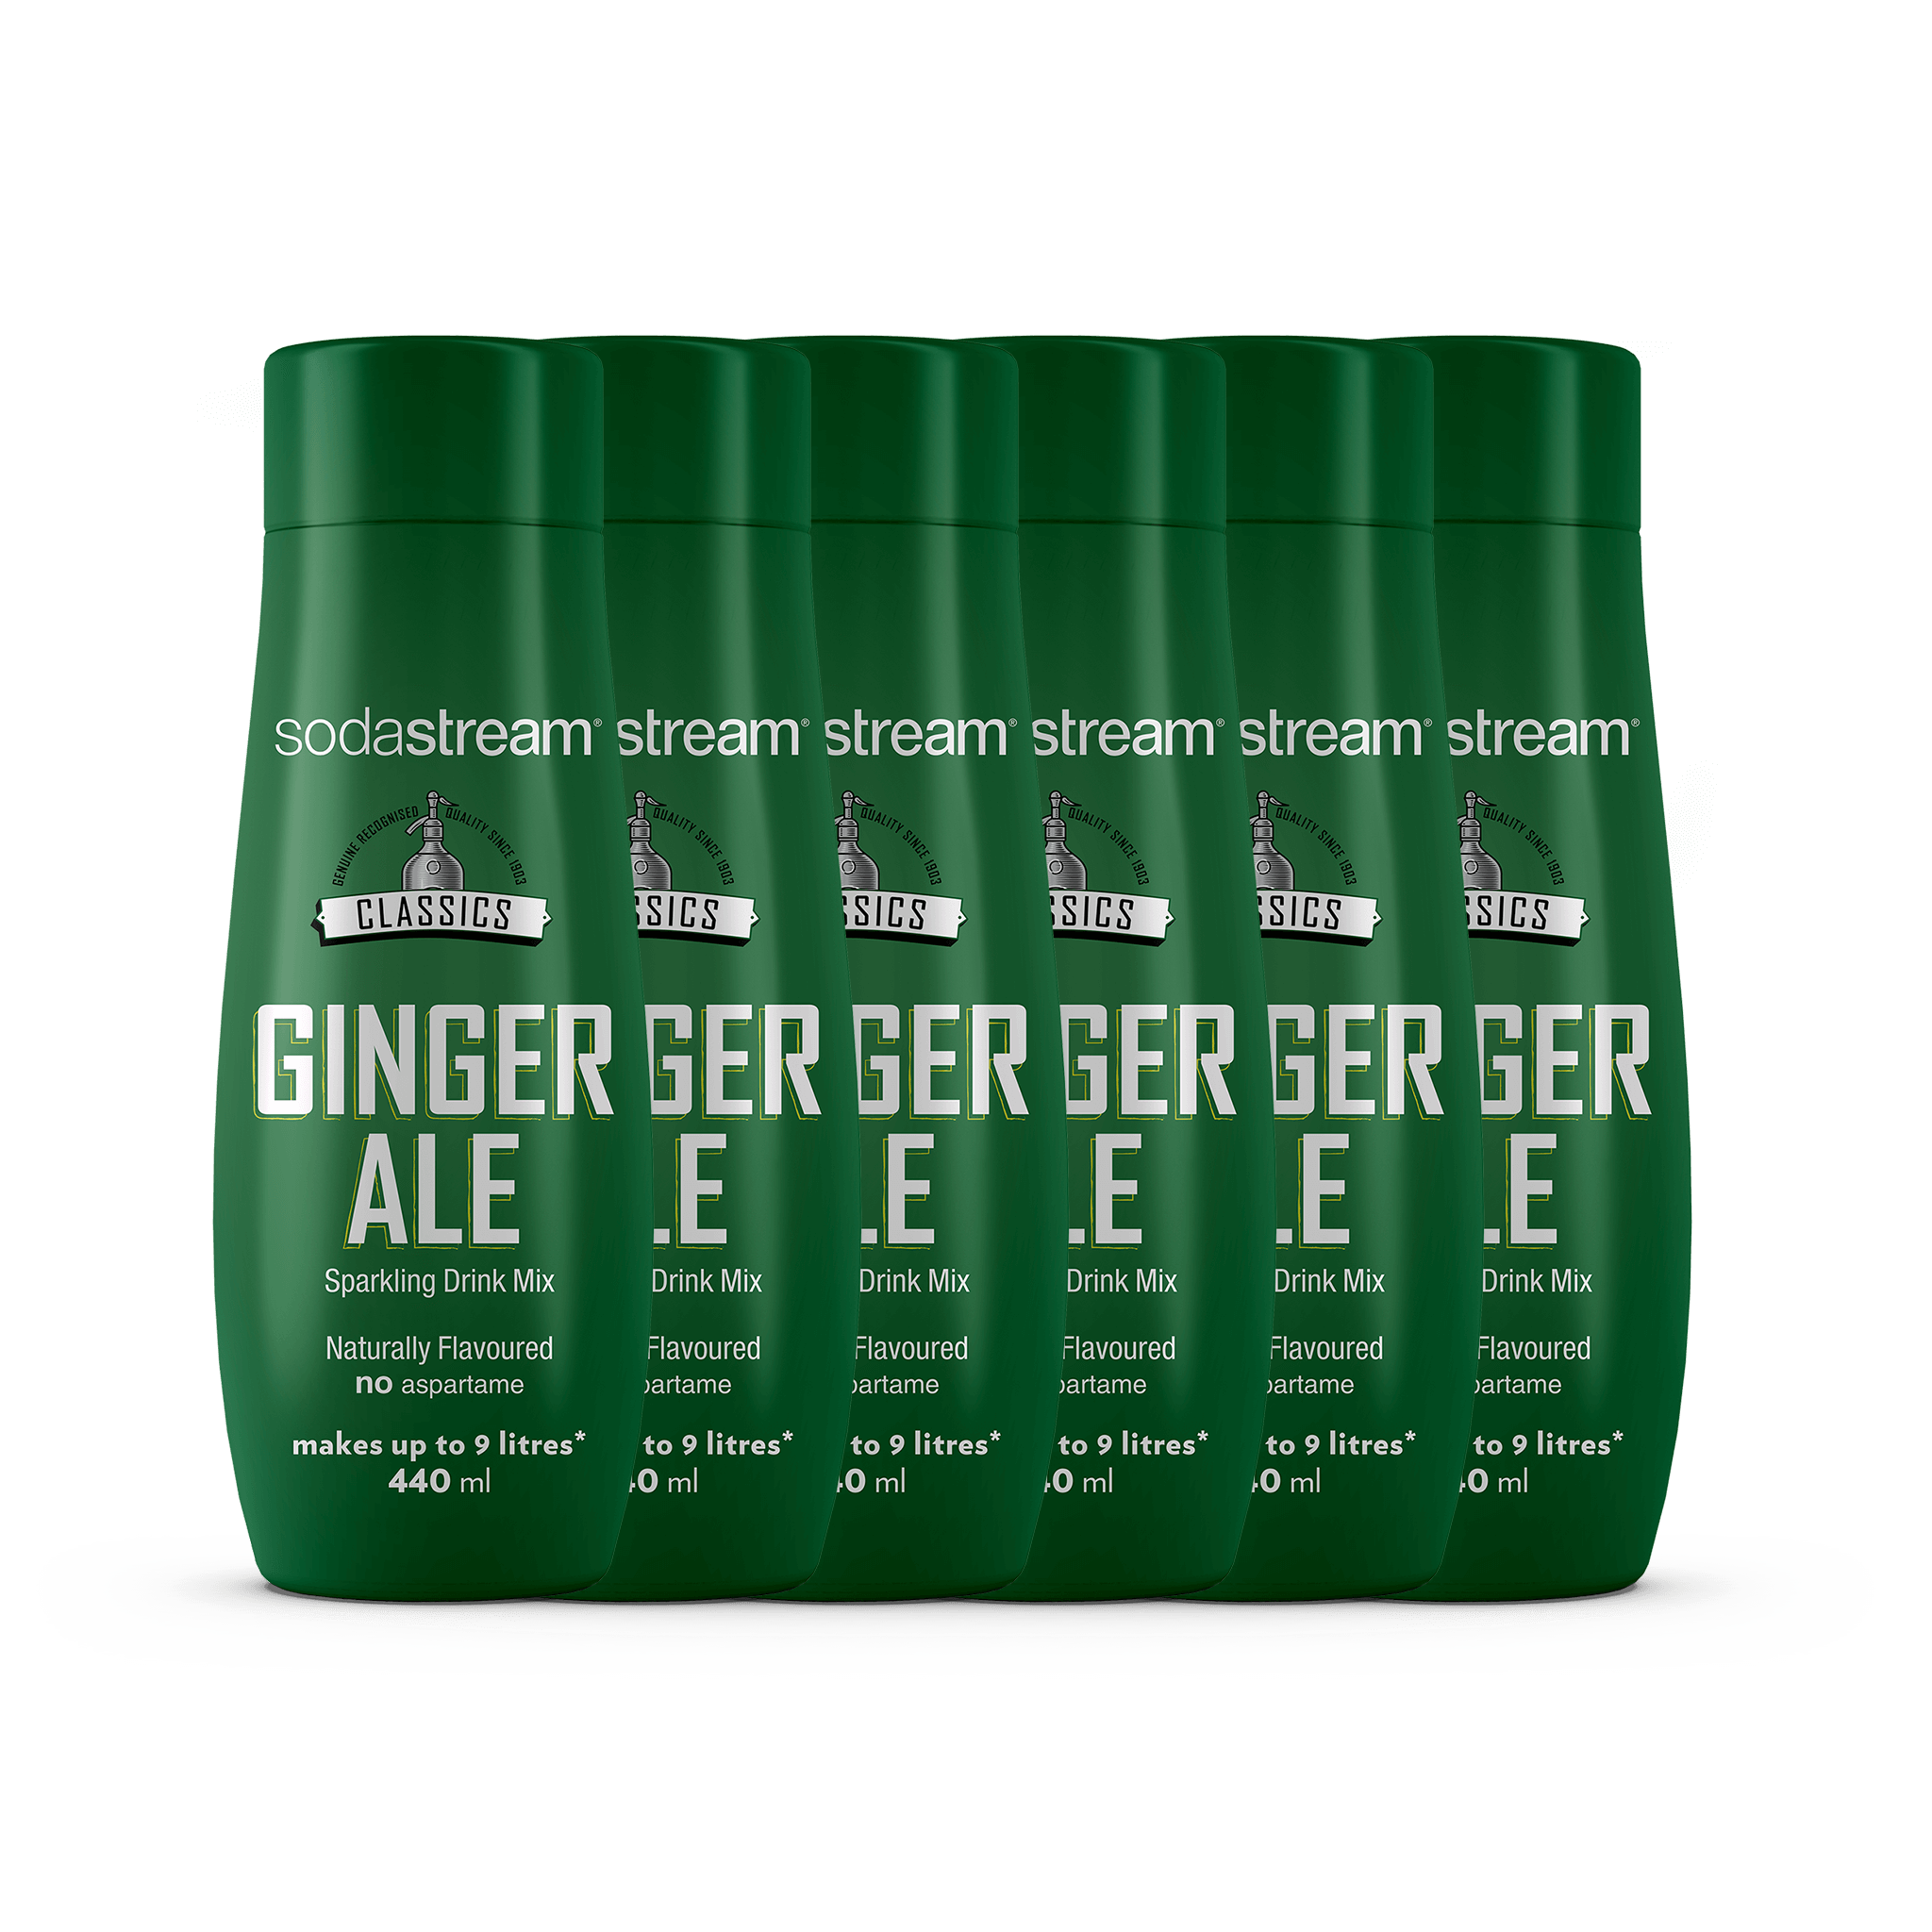 Ginger Ale 6-pack (Best before August) sodastream